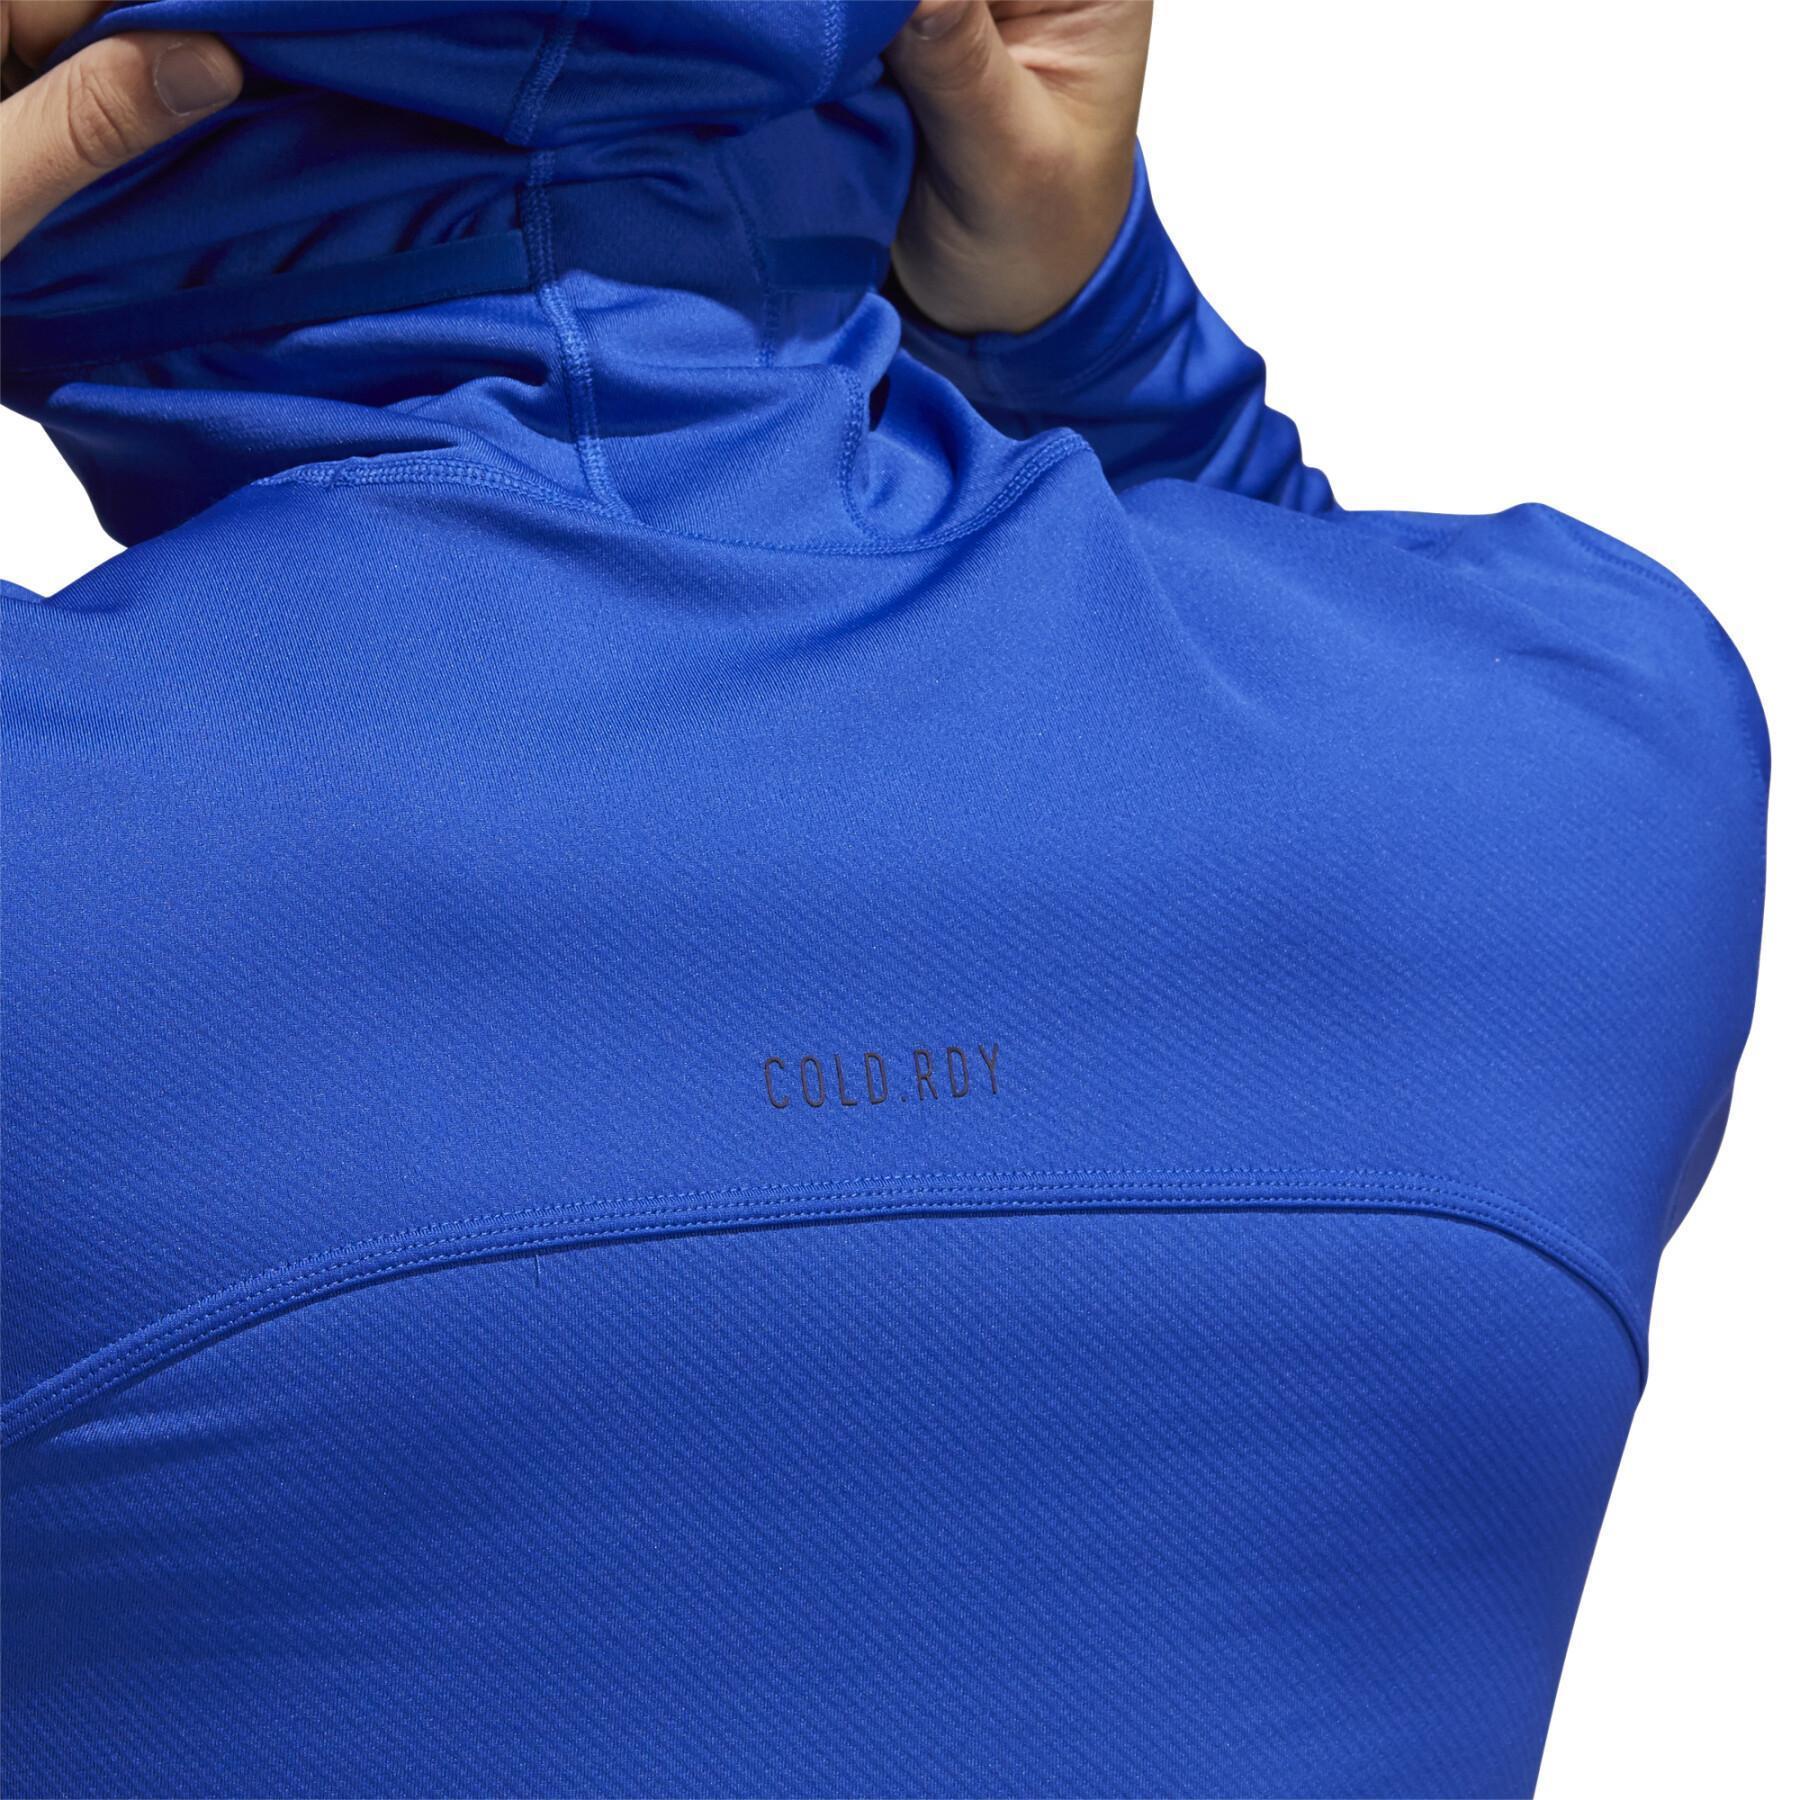 Sudadera con capucha adidas COLD.RDY Techfit Fitted